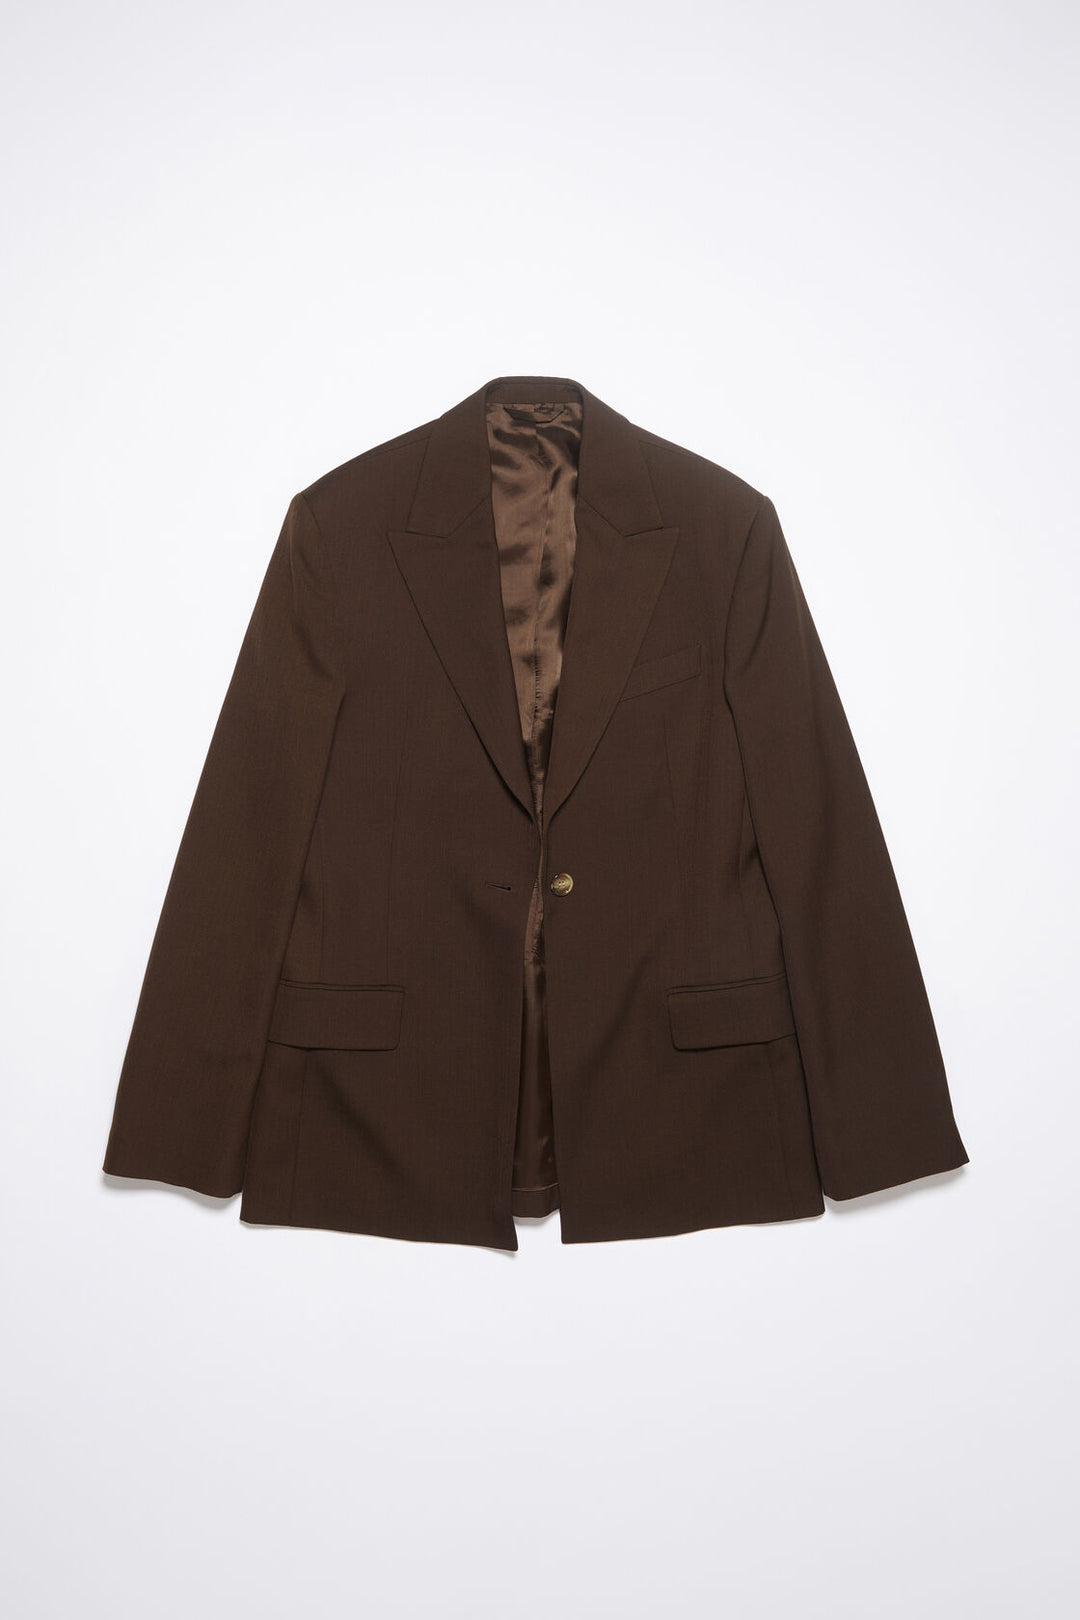 ACNE STUDIOS - SINGLE-BREASTED SUIT JACKET CHESTNUT BROWN - Dale